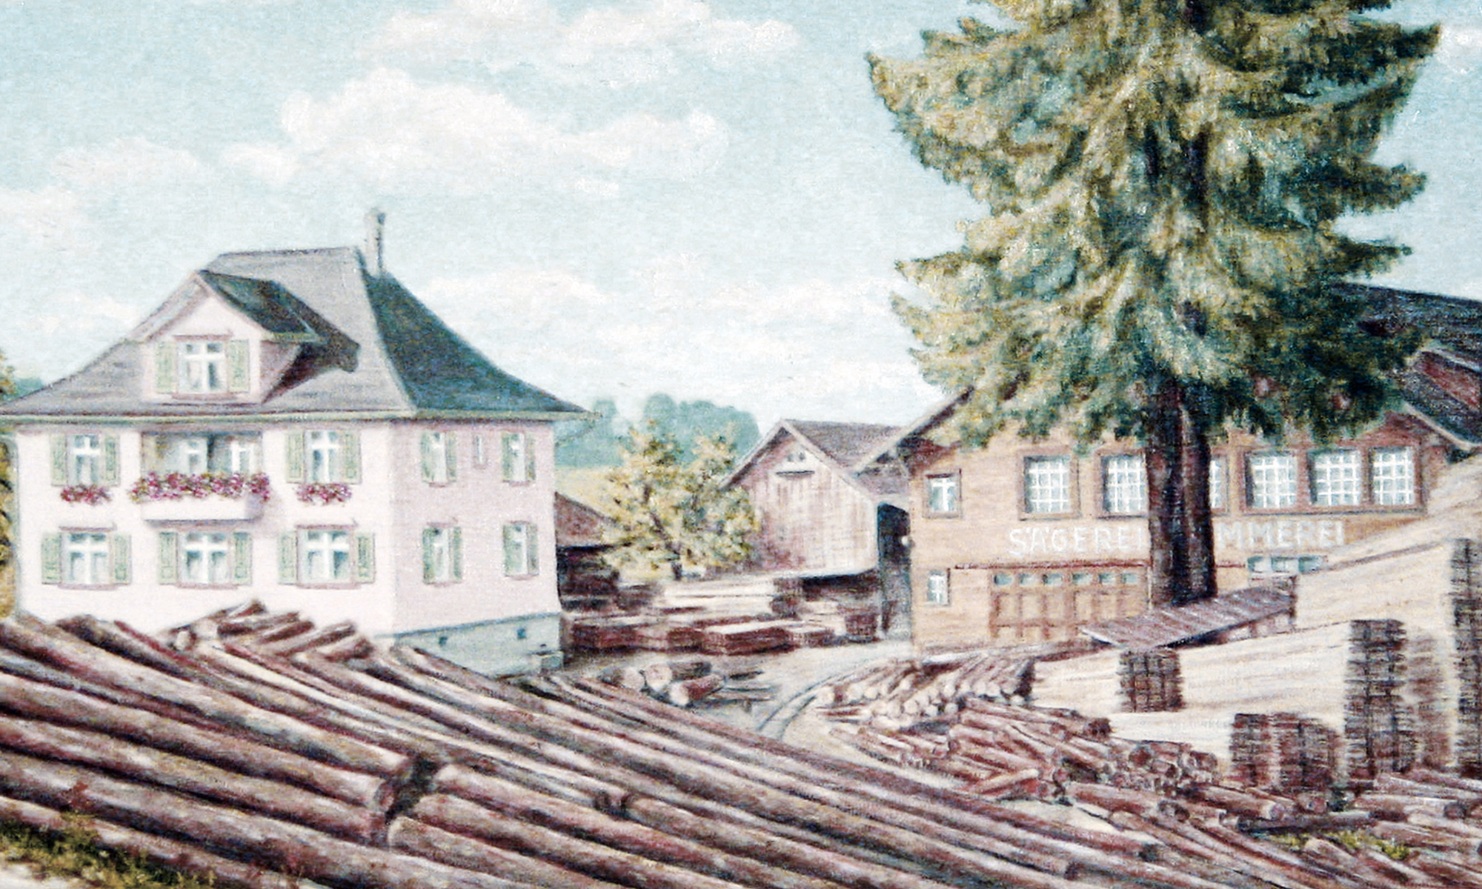 Old picture of Erlenhof, painted by an artist